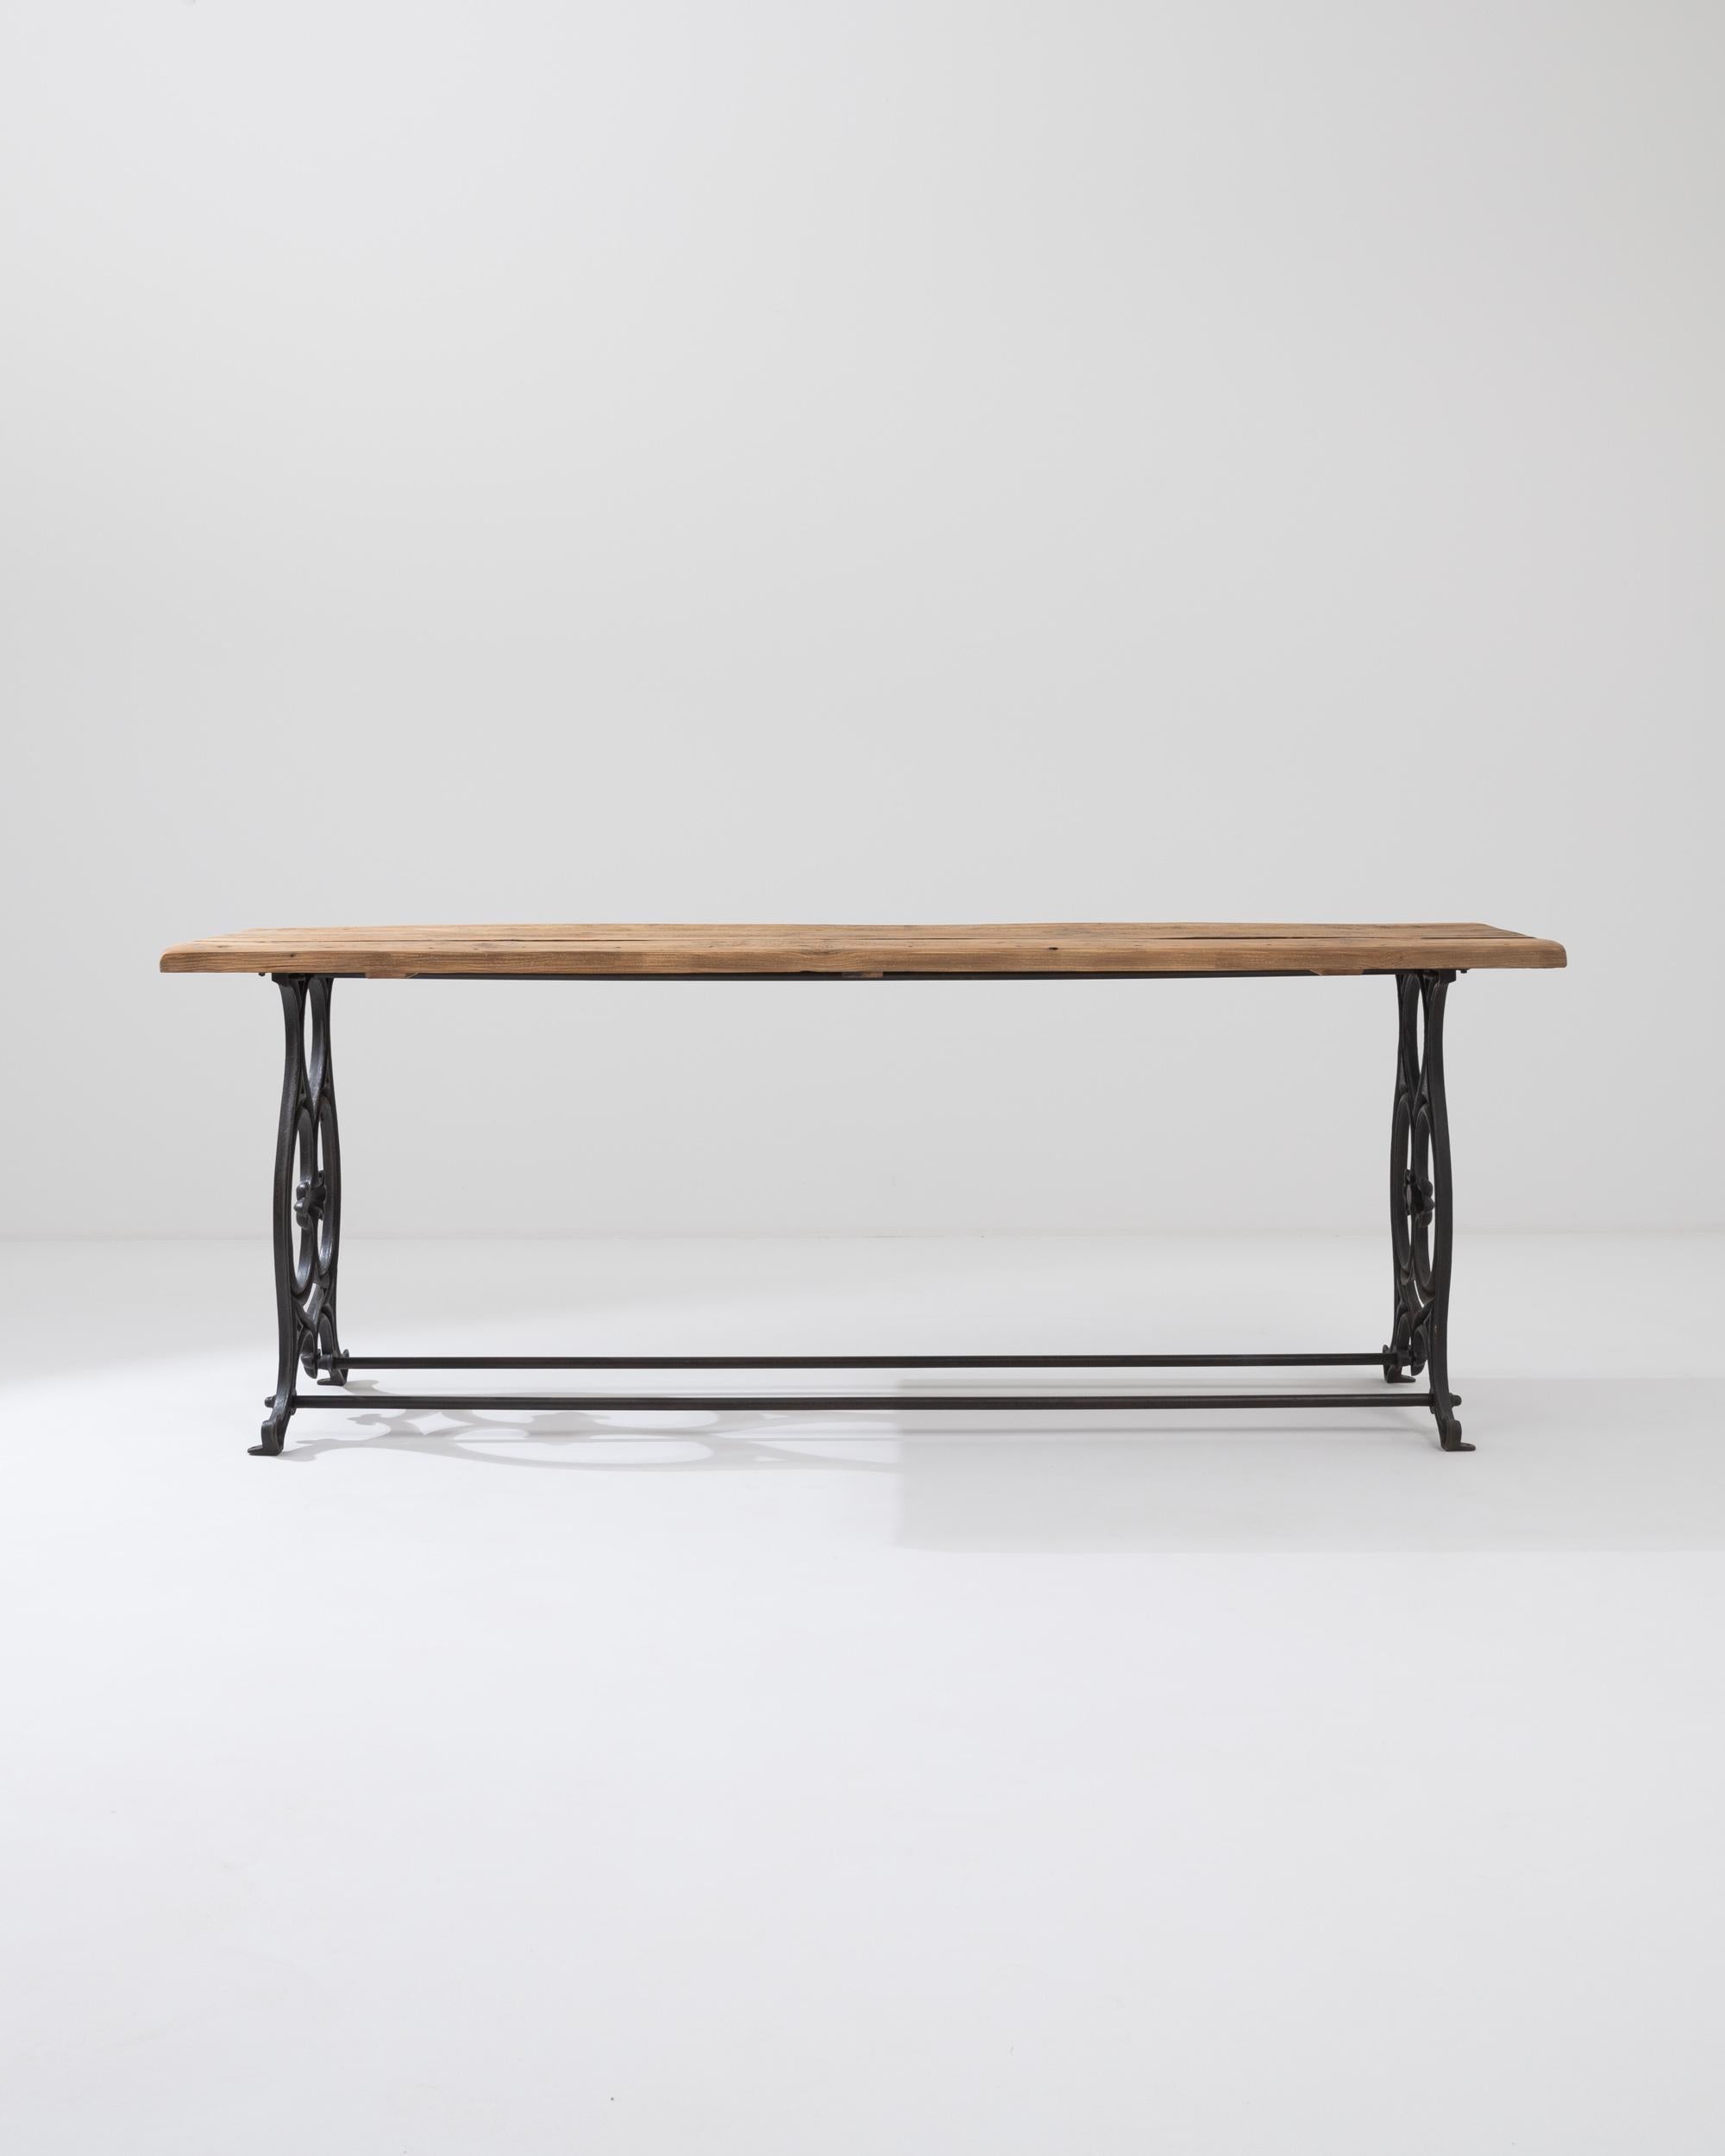 A metal table with a wooden top made in 1900s, France. Gracefully metal legs join together this simple yet elegant table. With three wooden table top slots and a cast understructure, this unique table combines rustic charm with an esteemed